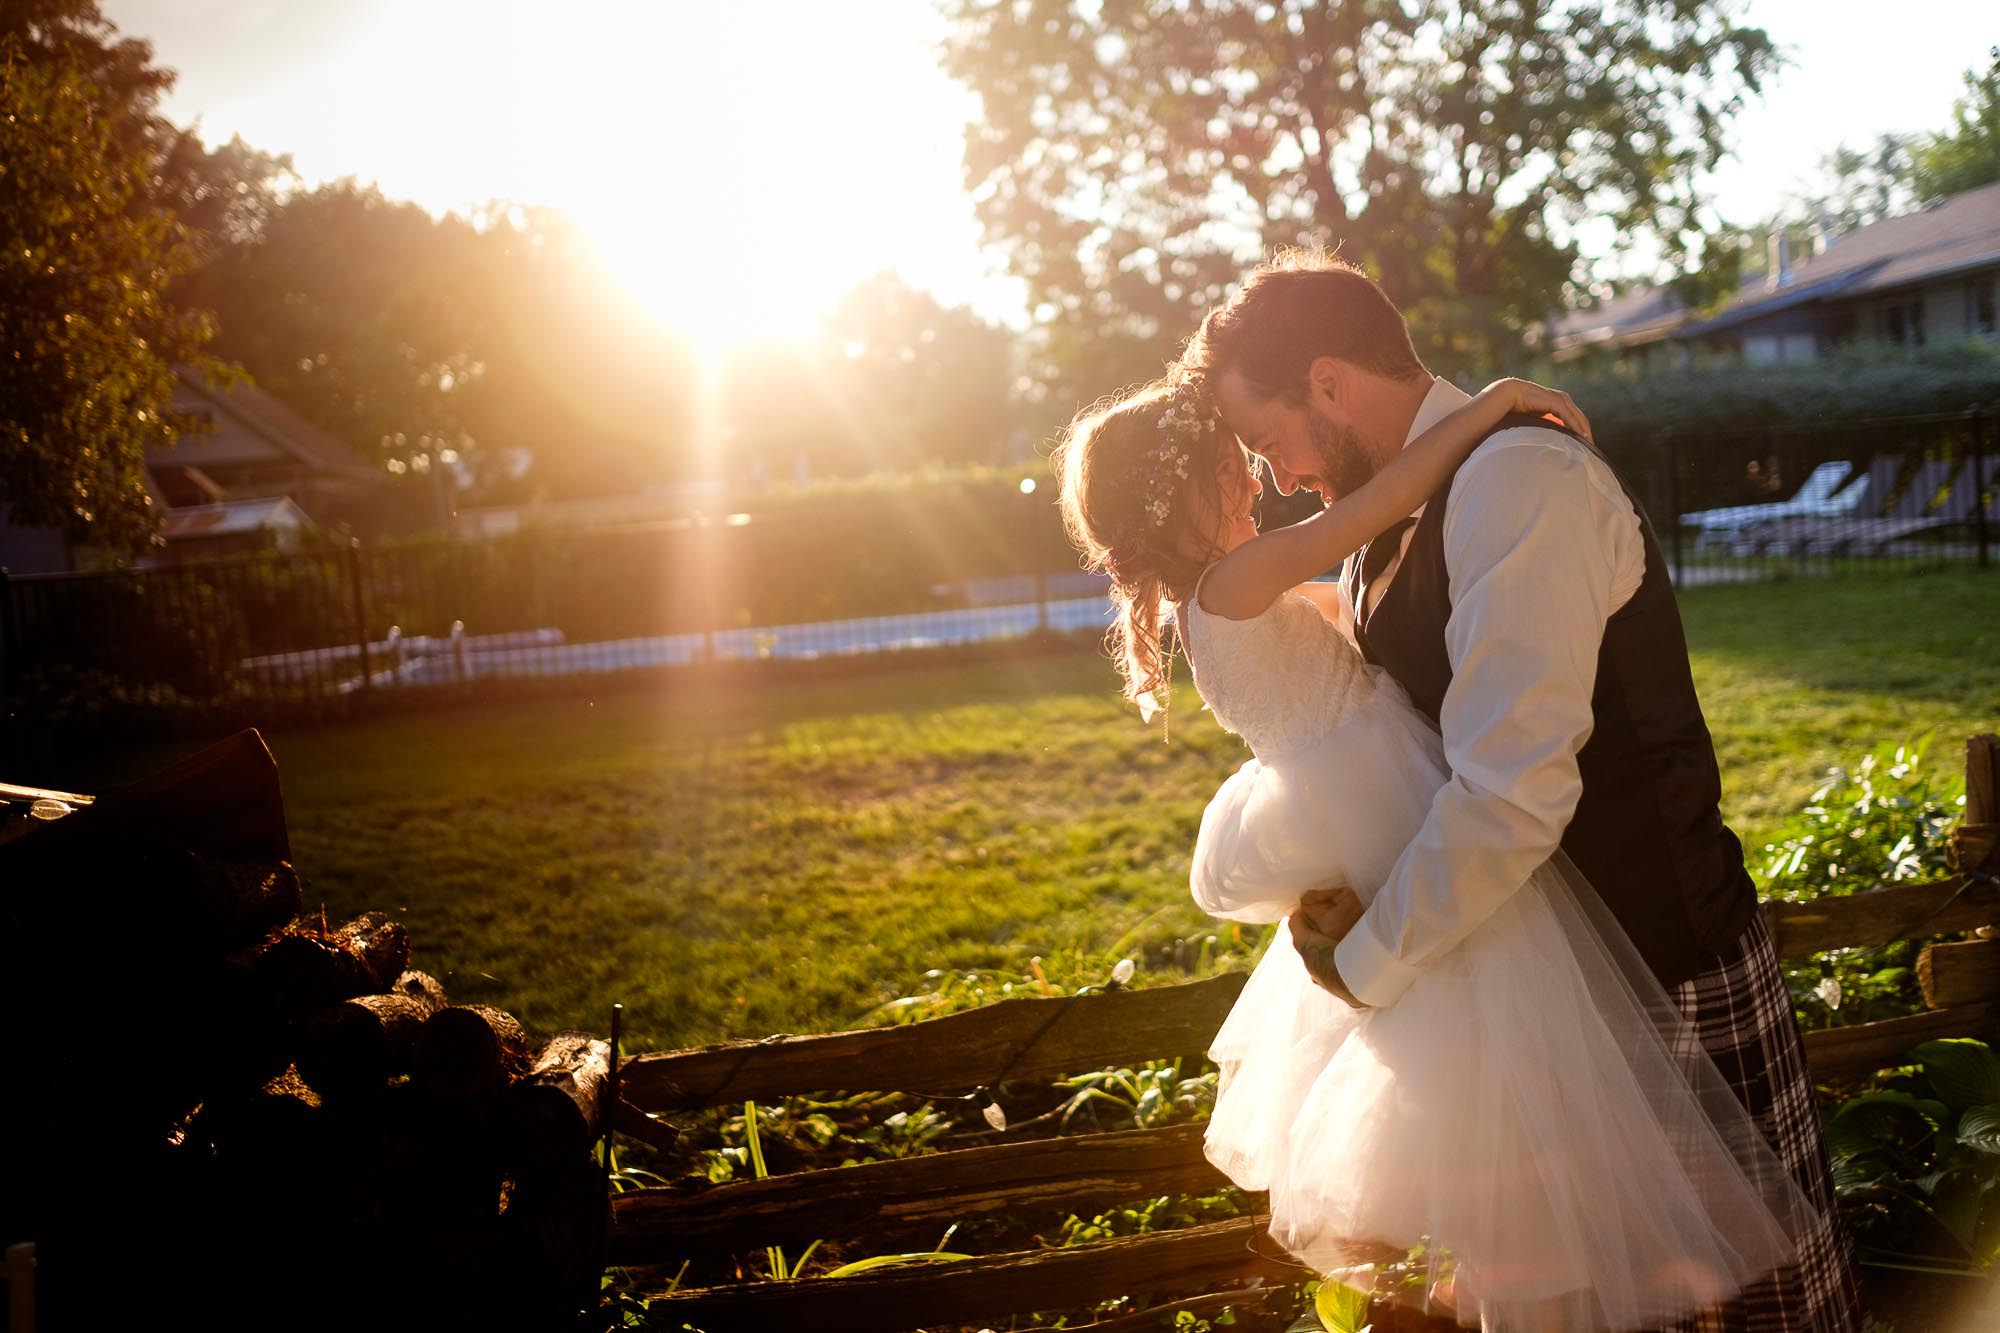  the groom gives his daughter a hug after the ceremony at a backyard wedding in Barrie, Ontario. 